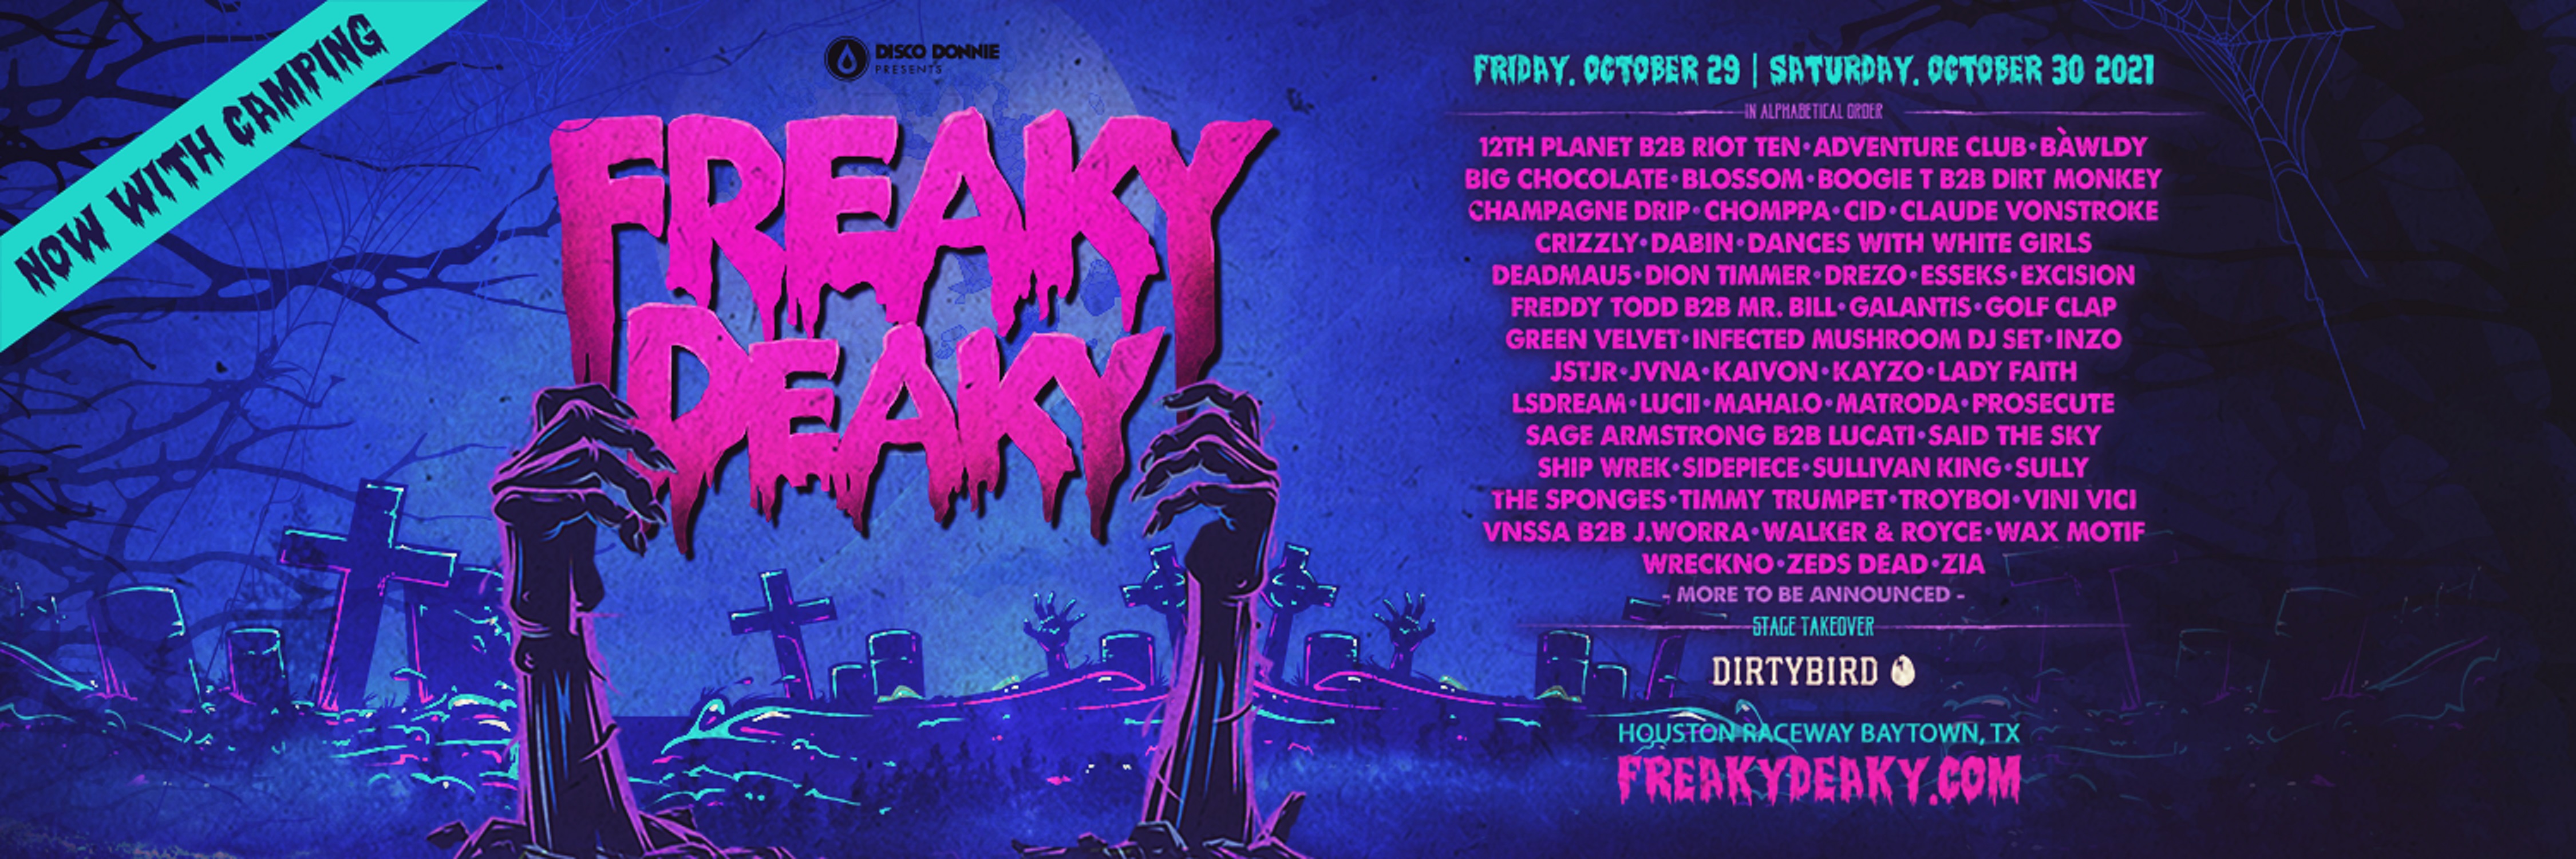 FREAKY DEAKY 2021 ANNOUNCES FESTIVAL LINEUP FEATURING 50+ ARTISTS